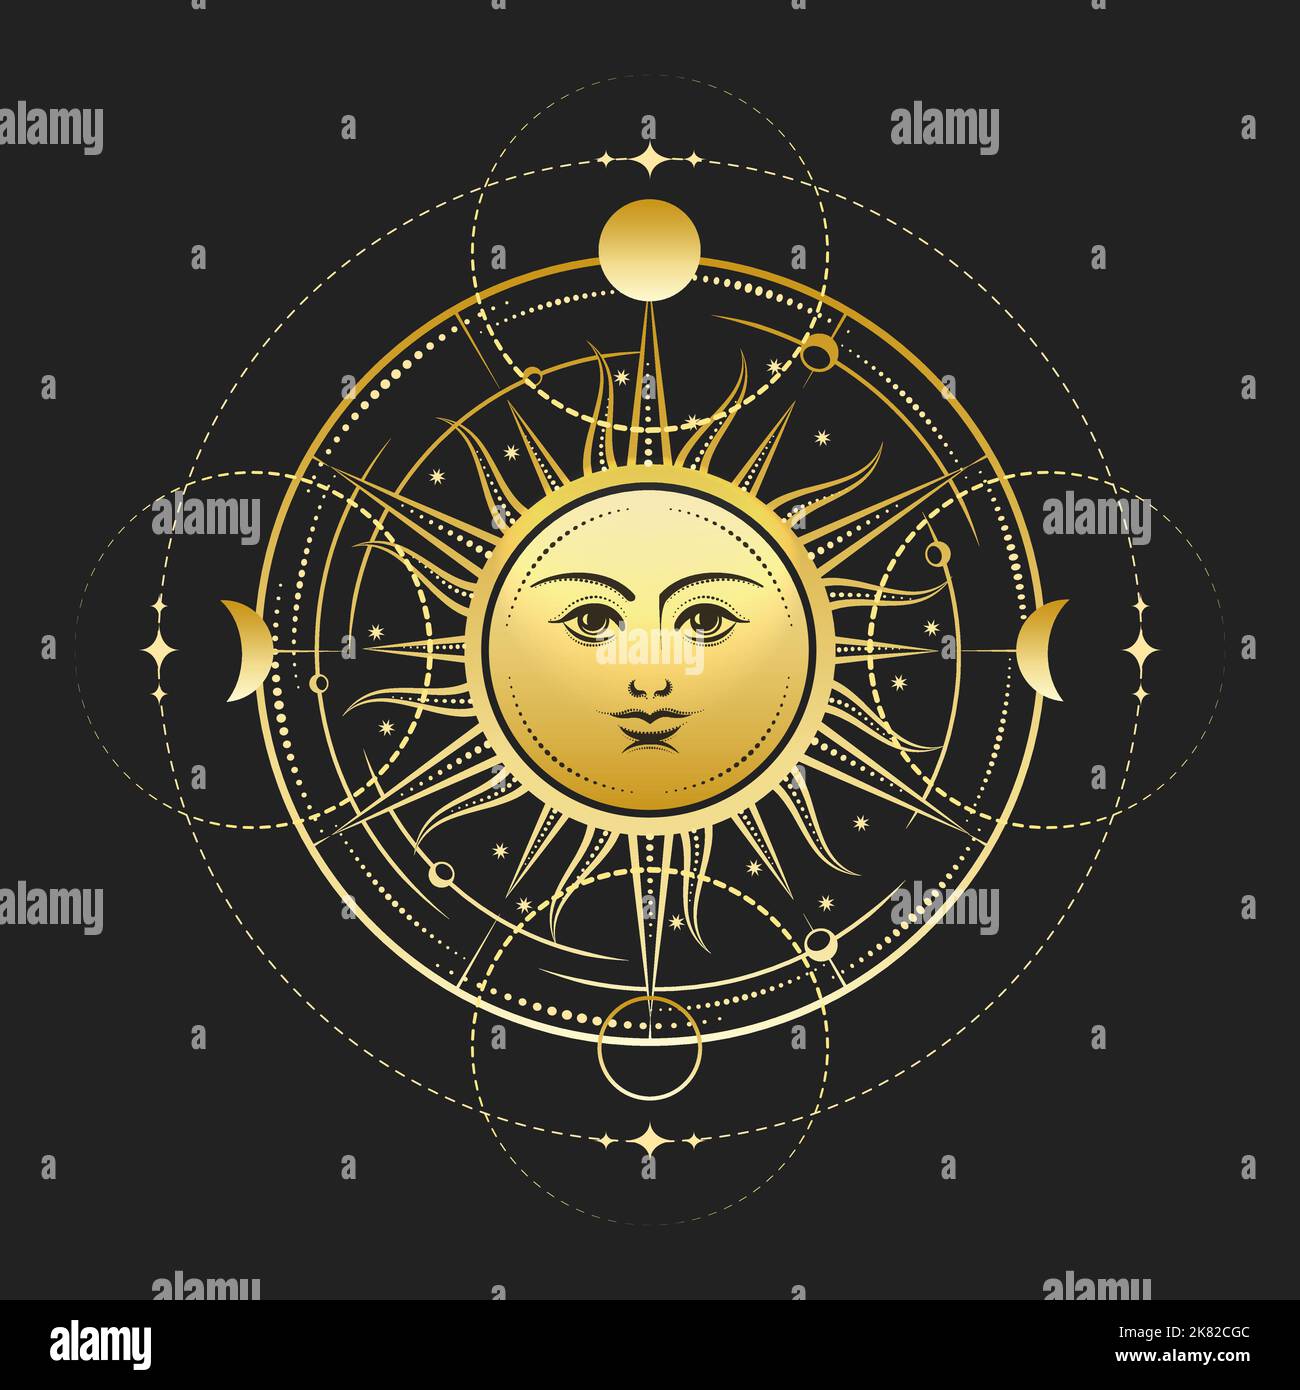 hi-res Alamy images Decorative sun moon and photography stock -